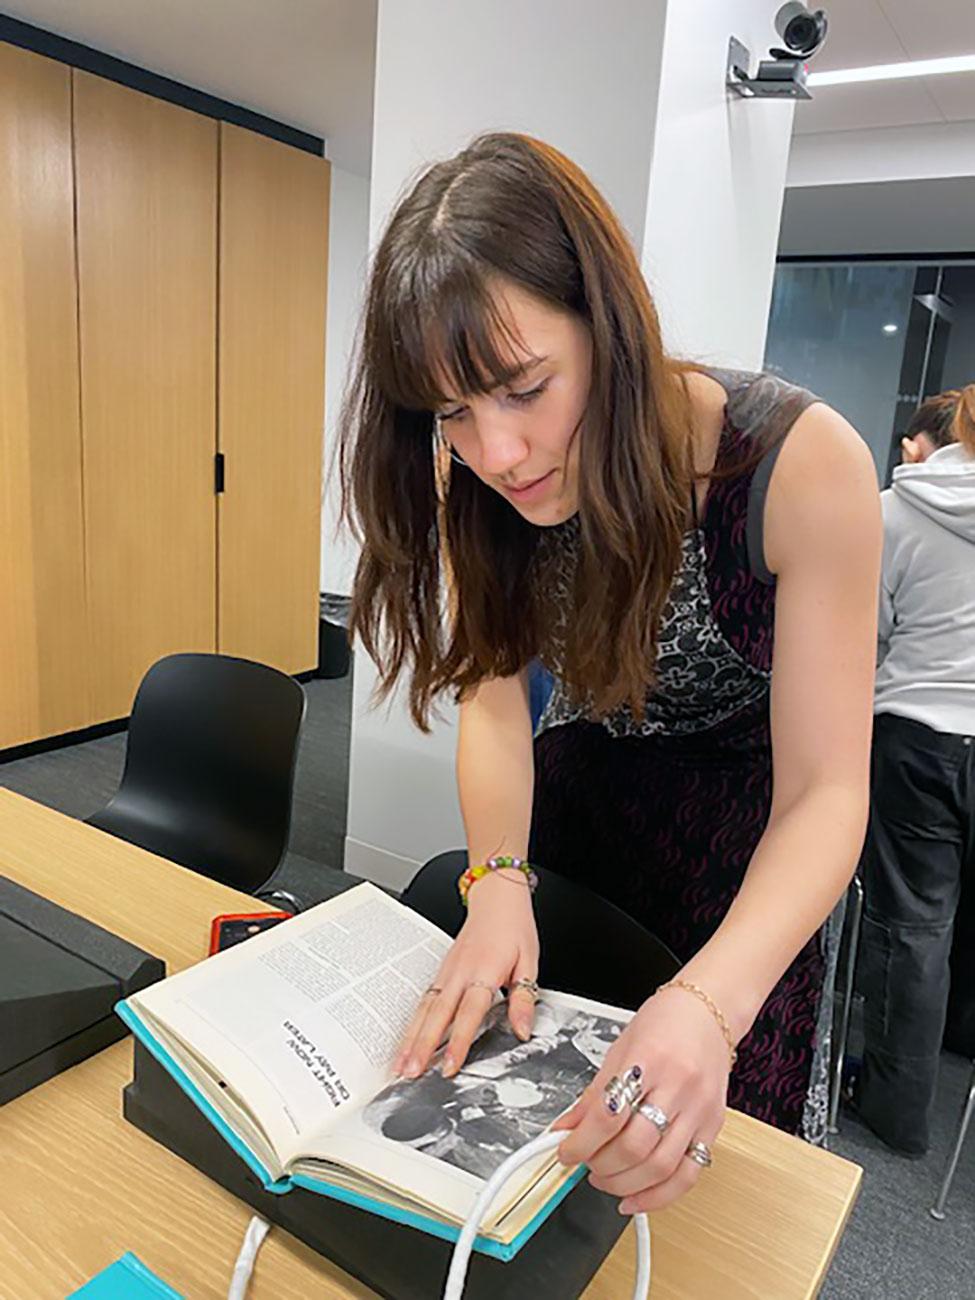 Pace University History student looks at a Latin American history book in the NACLA’s archives.